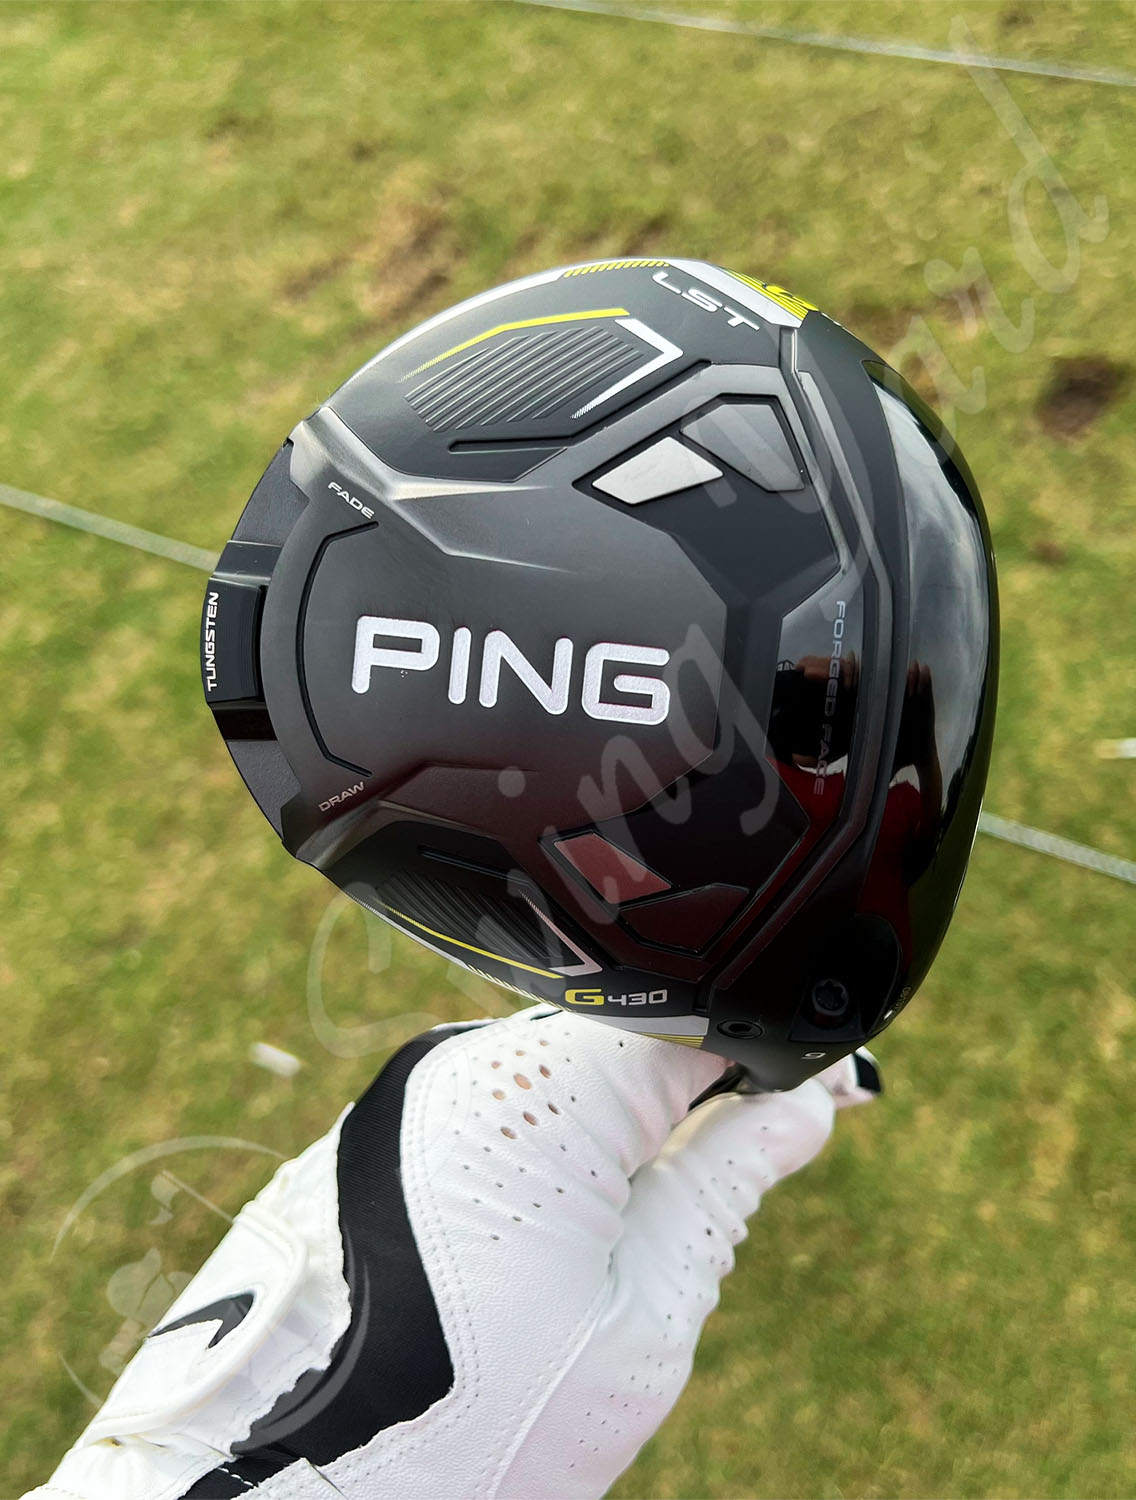 Me holding a new Ping G430 LST Driver for testing at the golf course